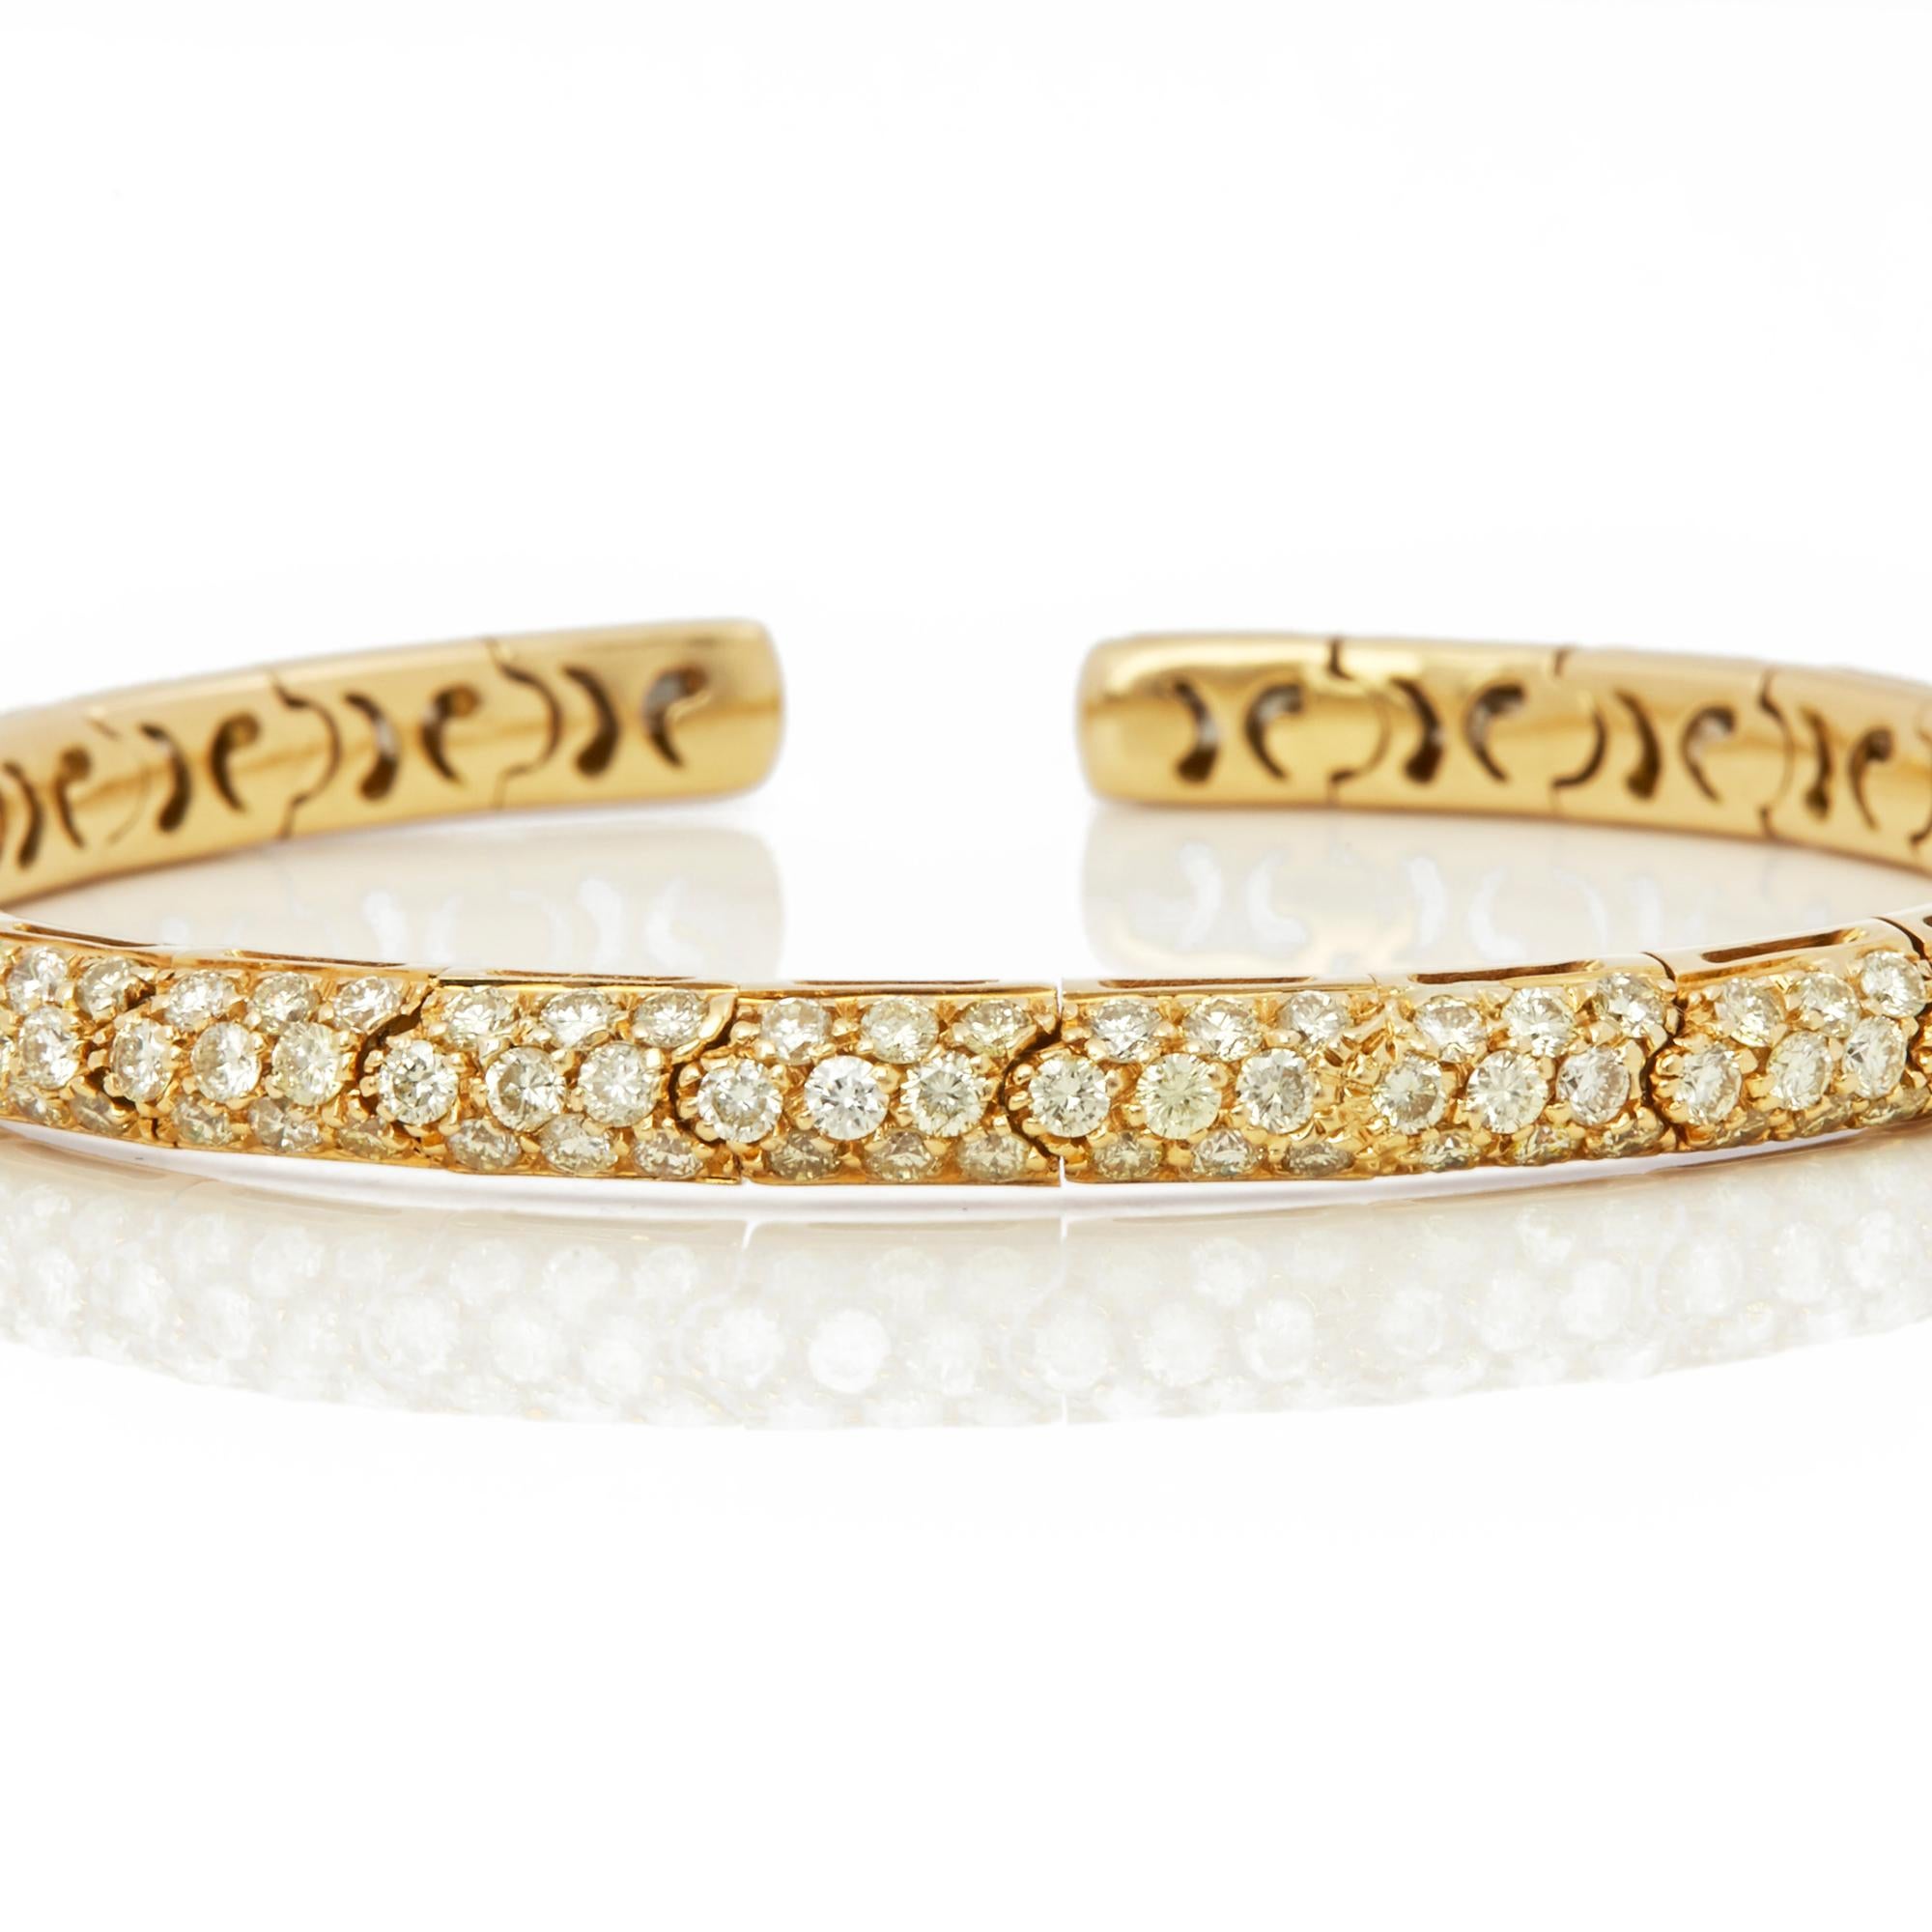 Code: J460
Brand: Mappin & Webb
Description: 18k Yellow Gold Fancy Yellow Diamond Cuff Bangle
Accompanied With: Presentation Box
Gender: Ladies
Bracelet Length: Adjustable 
Bracelet Width: 4.5mm
Condition: 9
Material: Yellow Gold
Total Weight: 20.93g